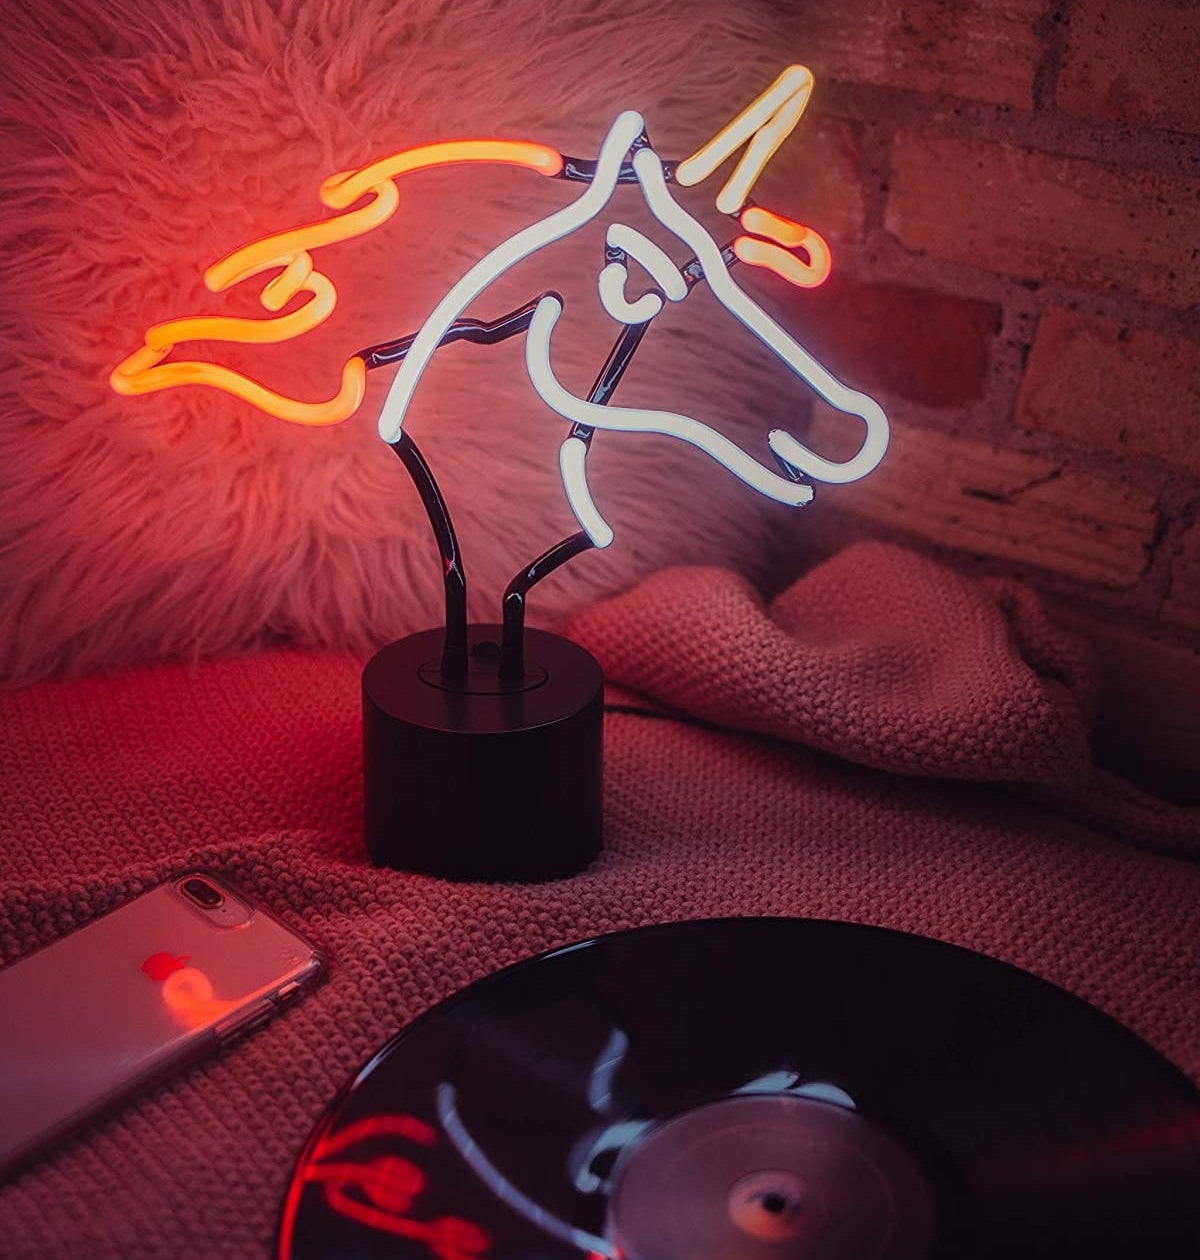 A unicorn-shaped neon light perched on a bed next to a vinyl record, phone, and fluffy pillow